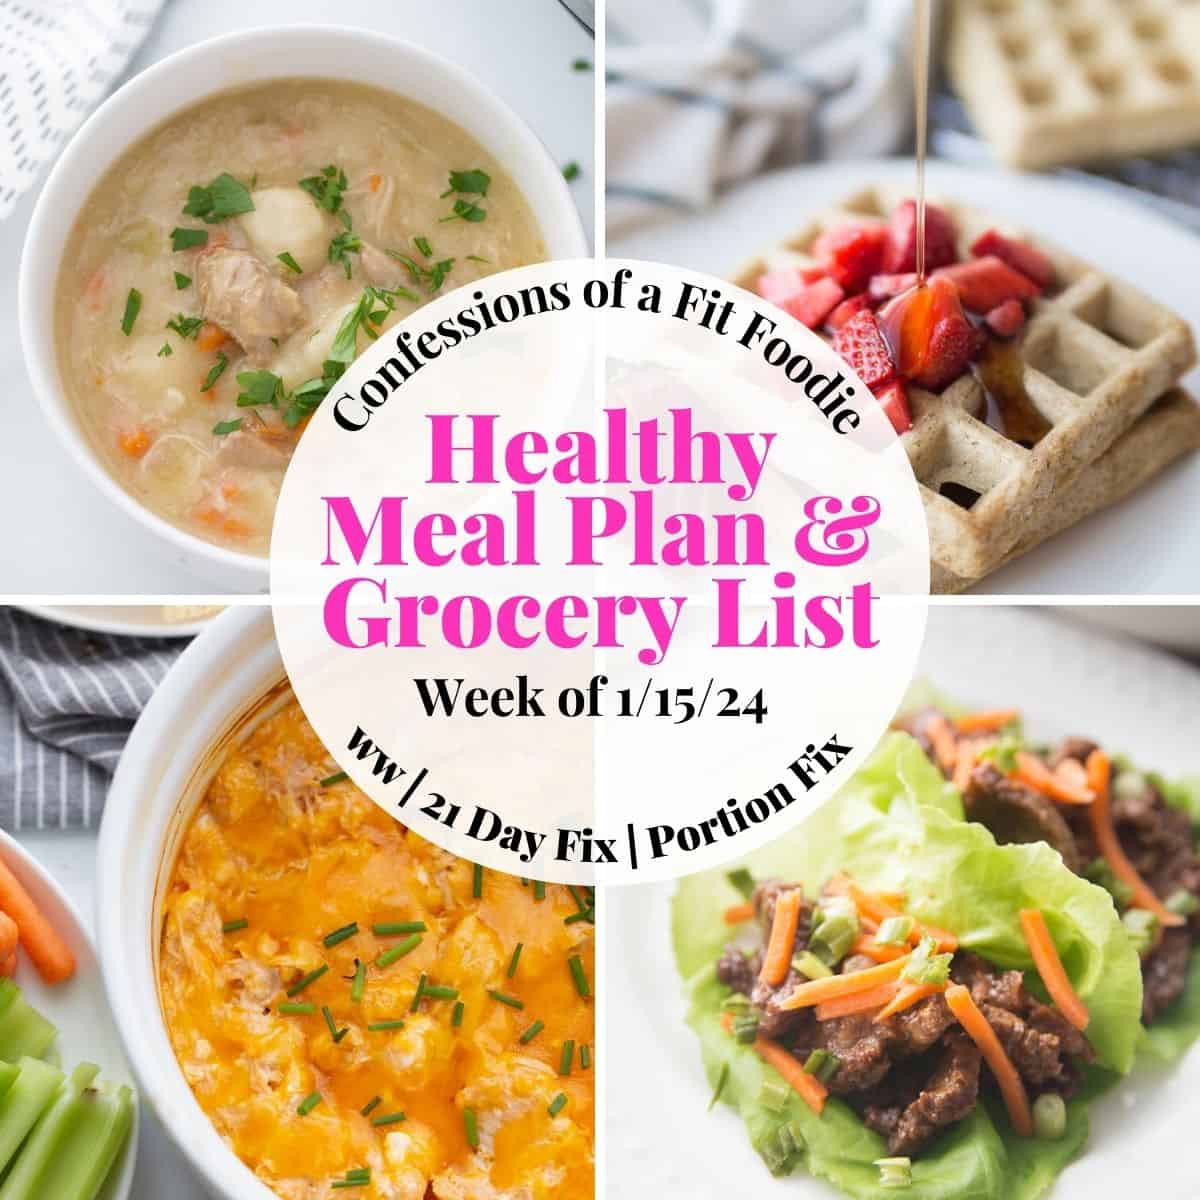 Food photo collage with pink and black text on a white circle. Text says, "Healthy Meal Plan Week of 1/15/24"